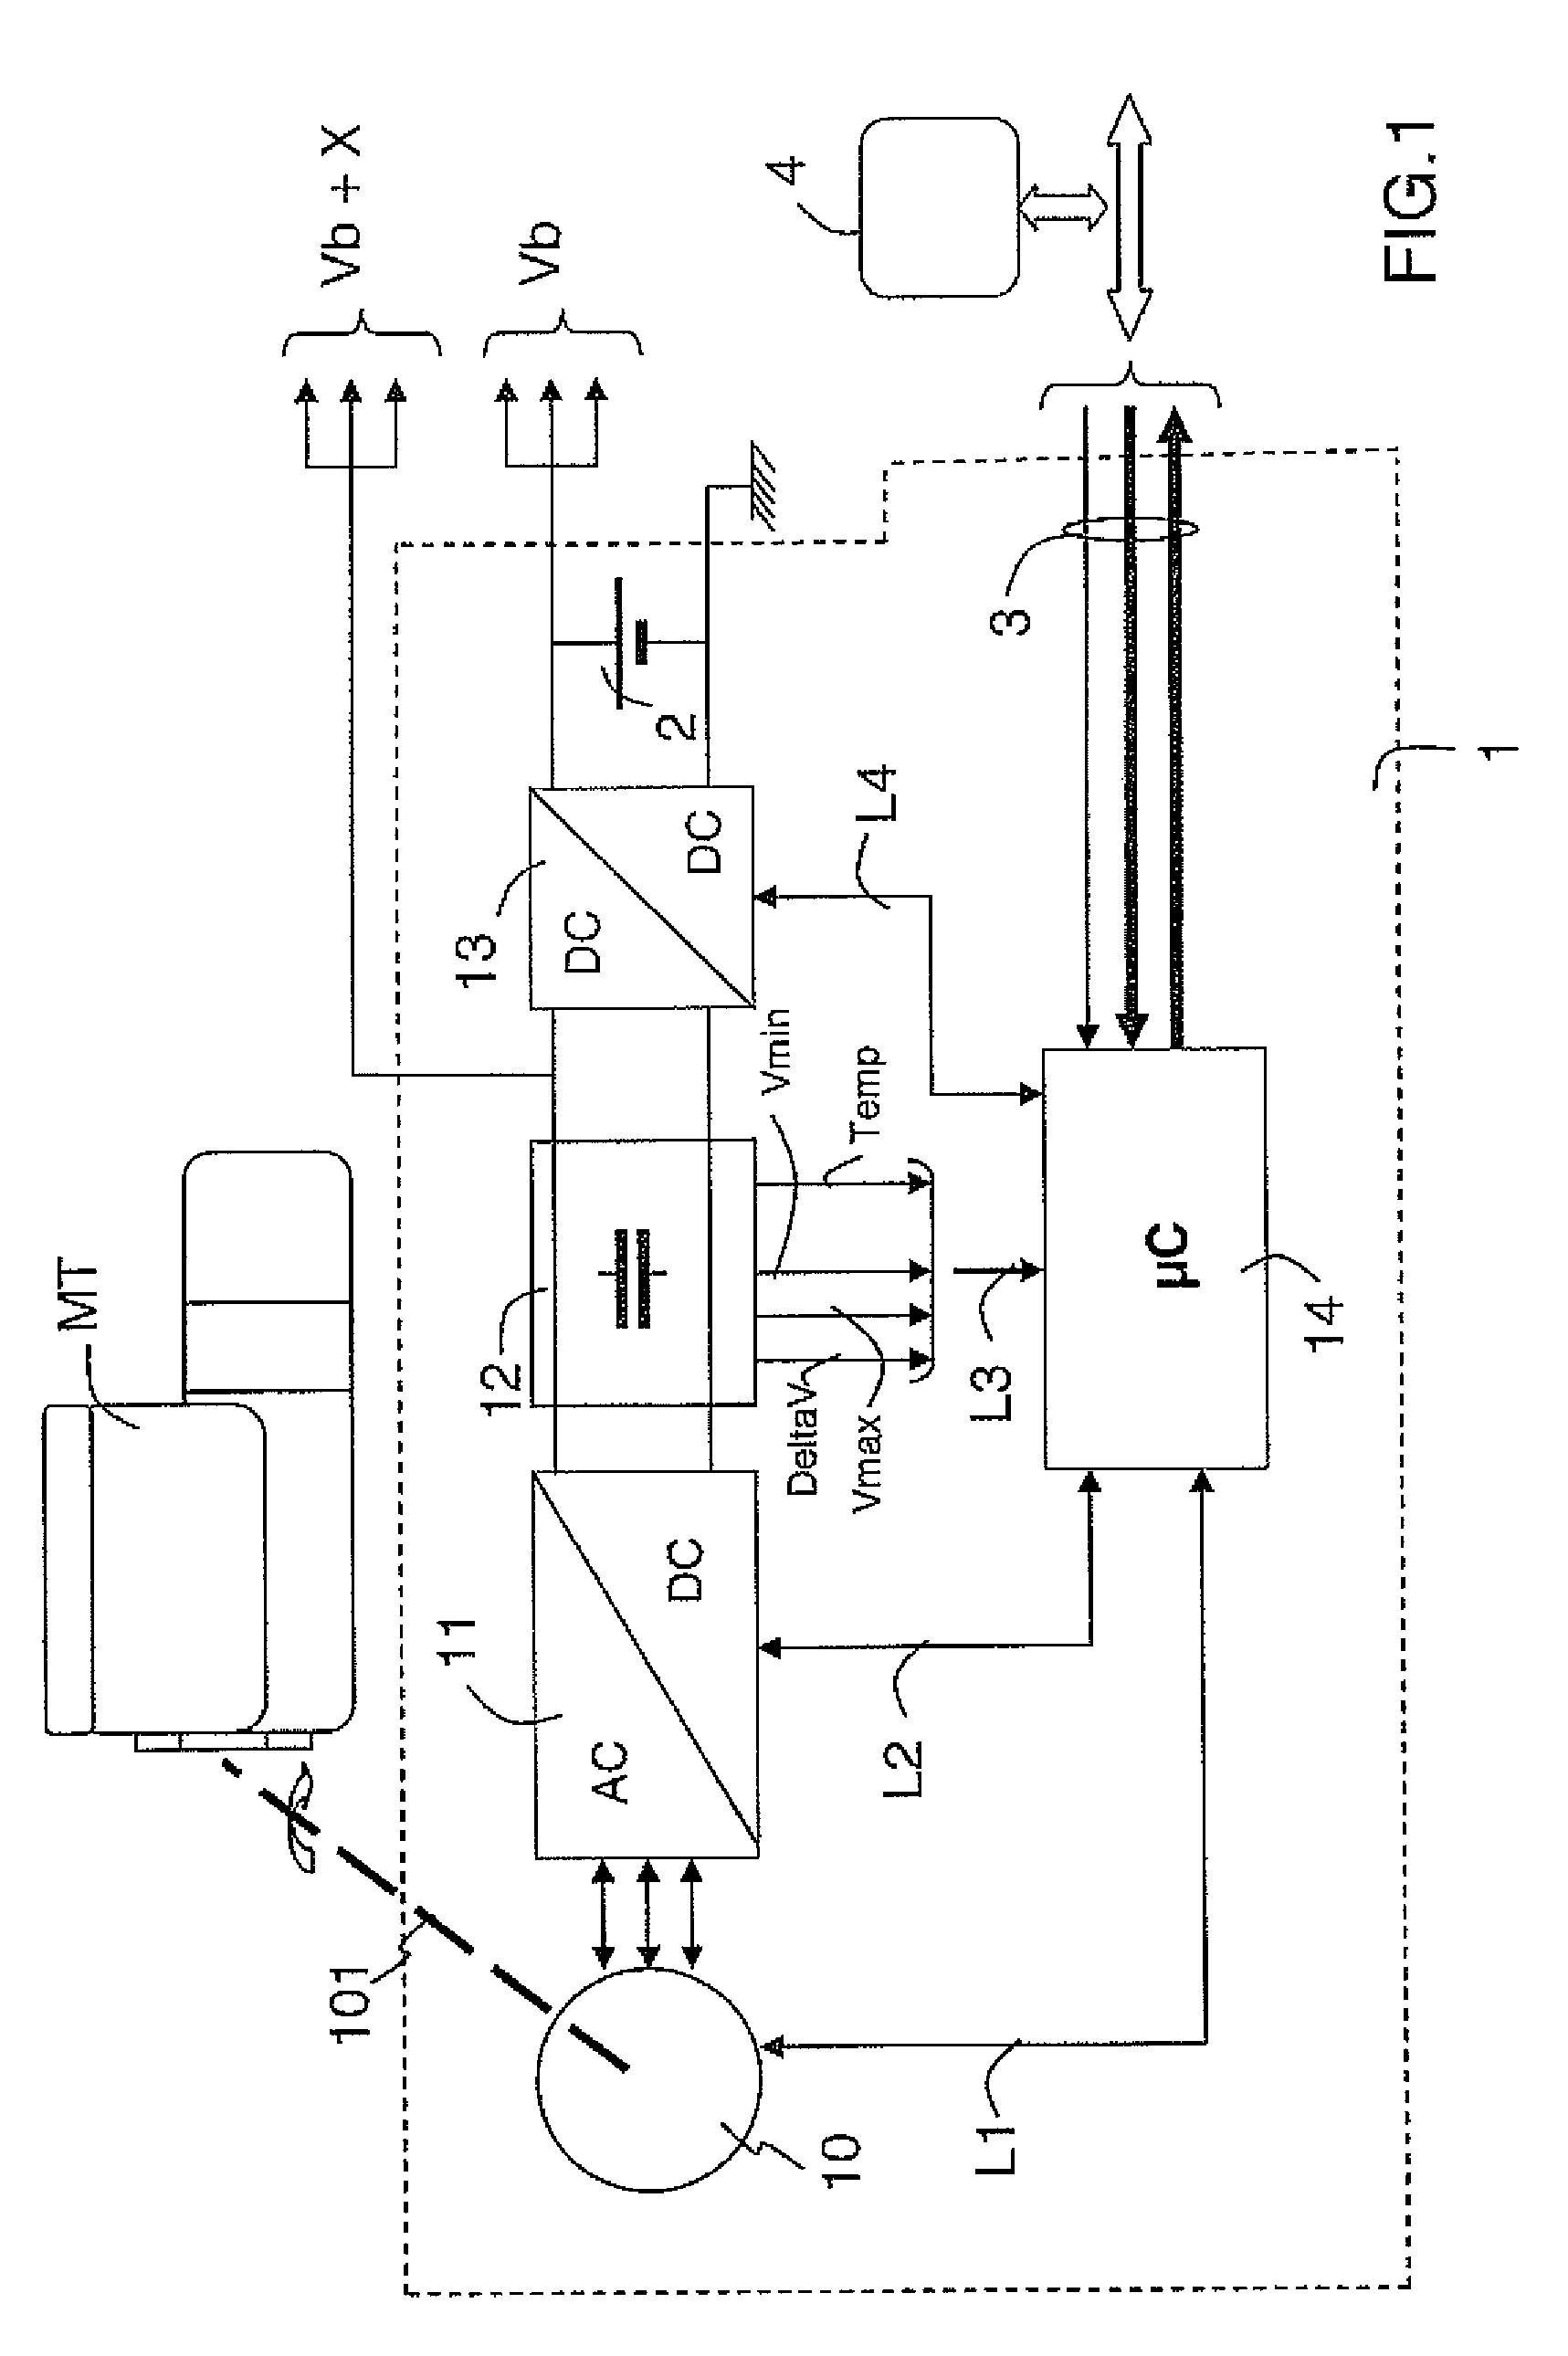 Method for driving micro-hybrid system for vehicle and energy storage unit, and hybrid system for implementing the same